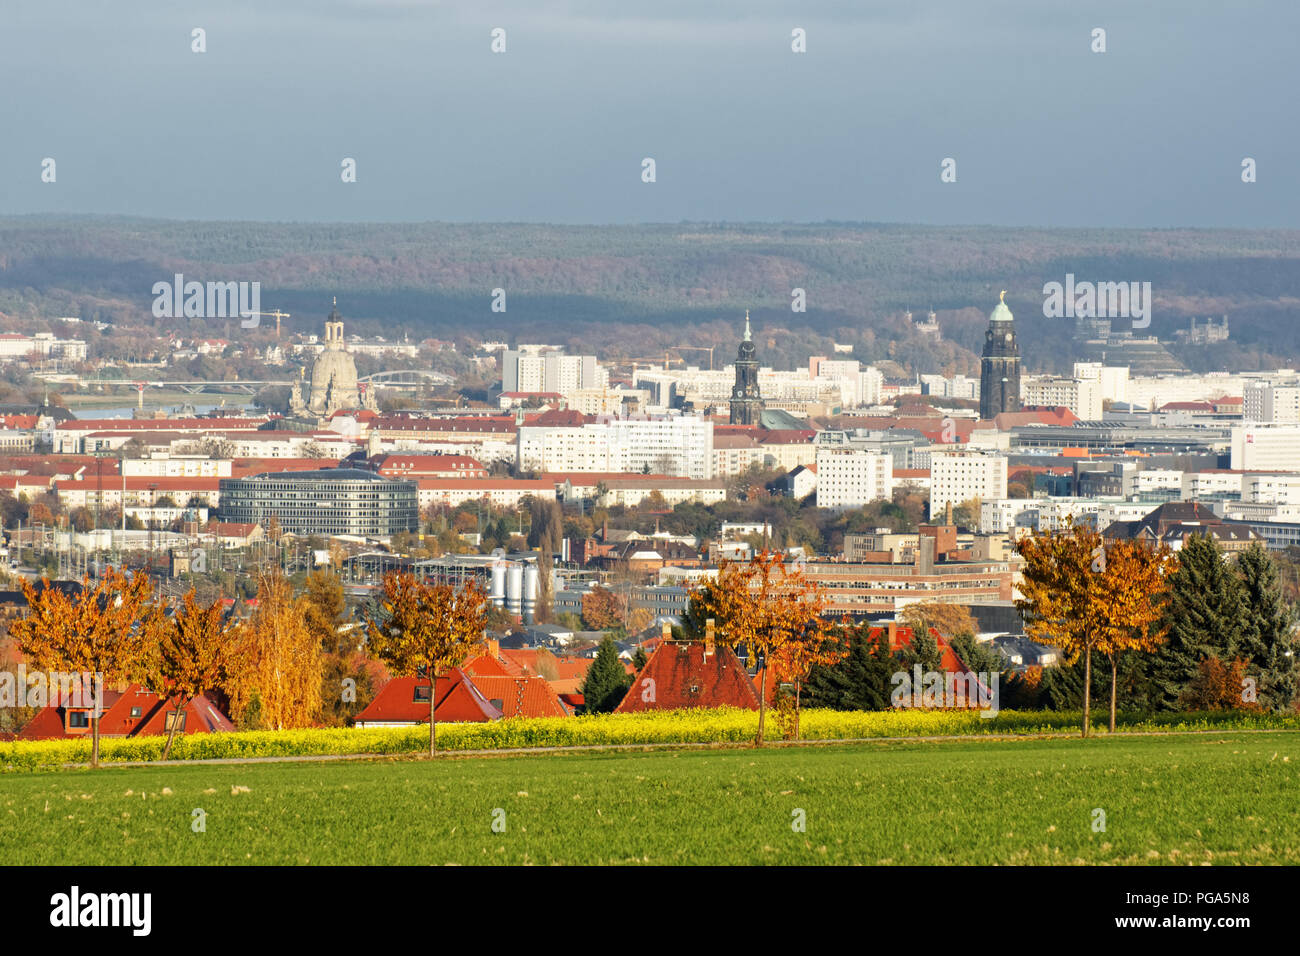 View in evening light over the city of Dresden from southwest with Frauenkirche, Town Hall Tower, Elbe and other sights, autumnal colored trees in for Stock Photo